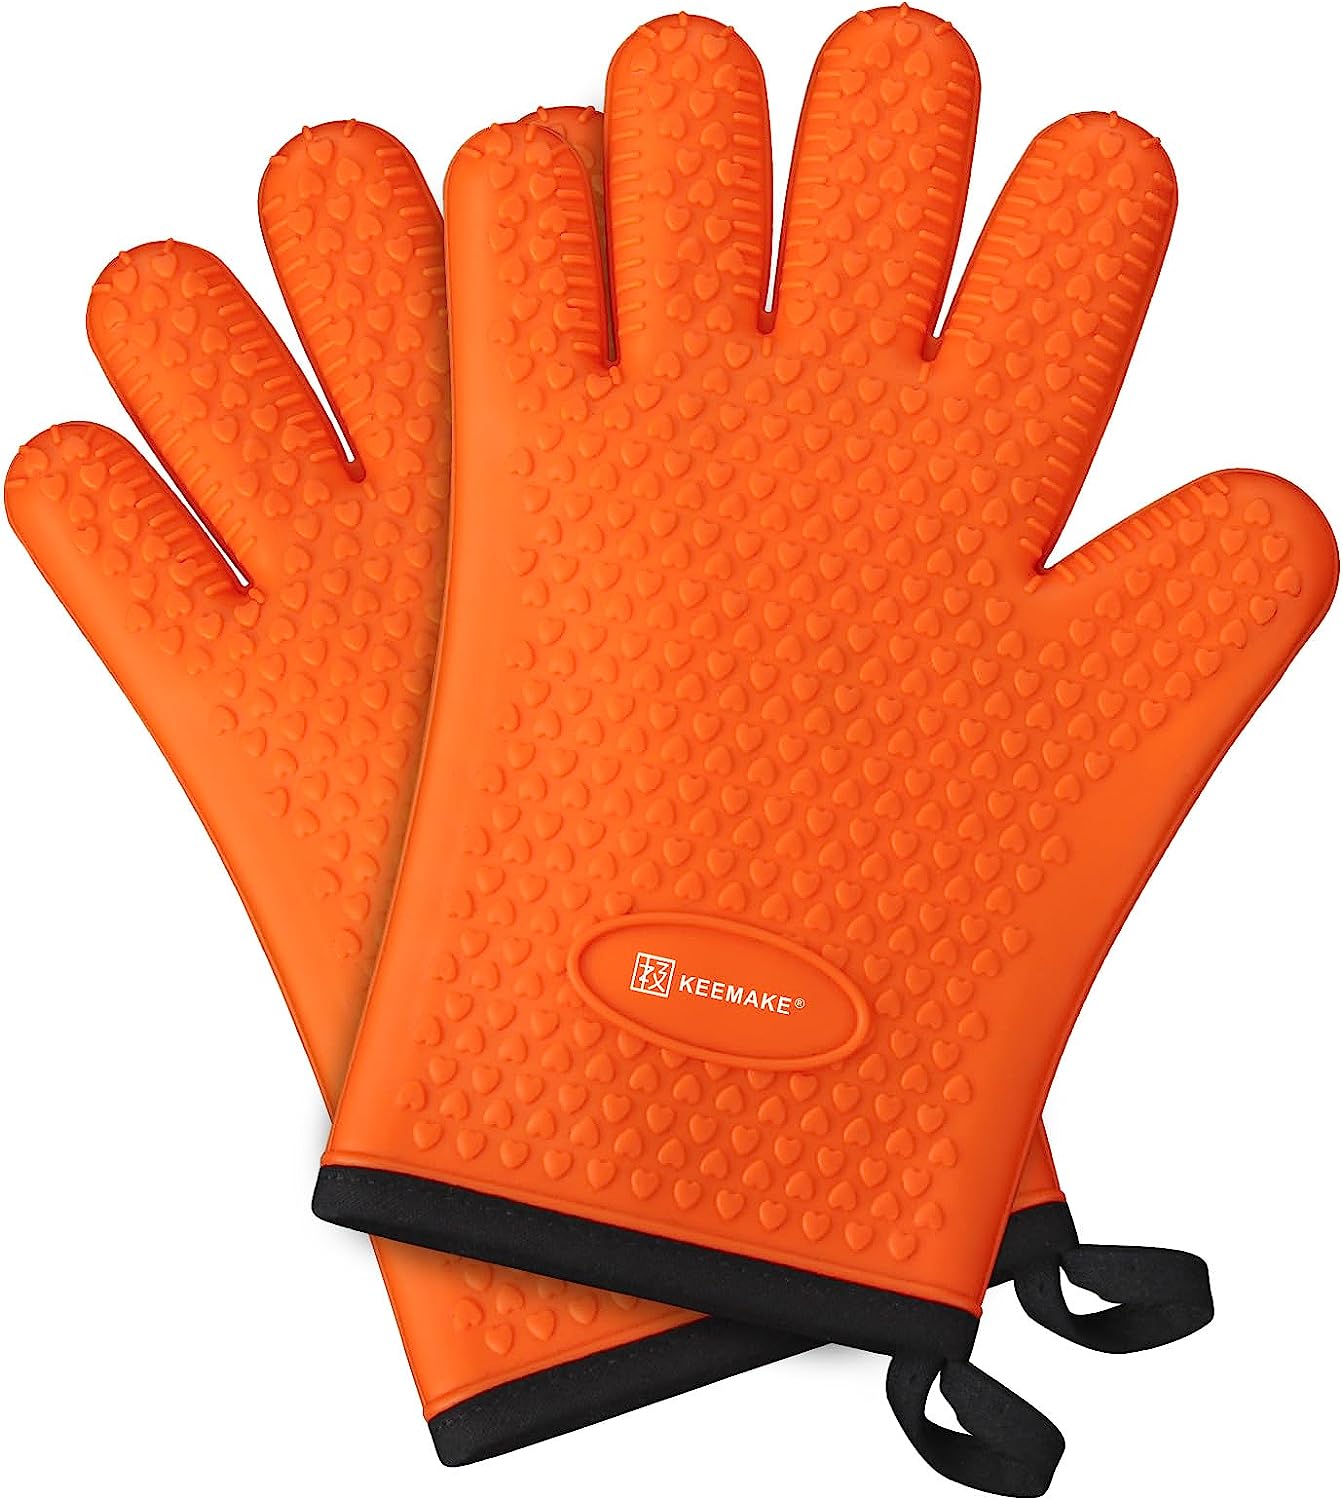 KEEMAKE Silicone Oven Mitts, Heat Resistant Gloves for Grilling Outside-Orange